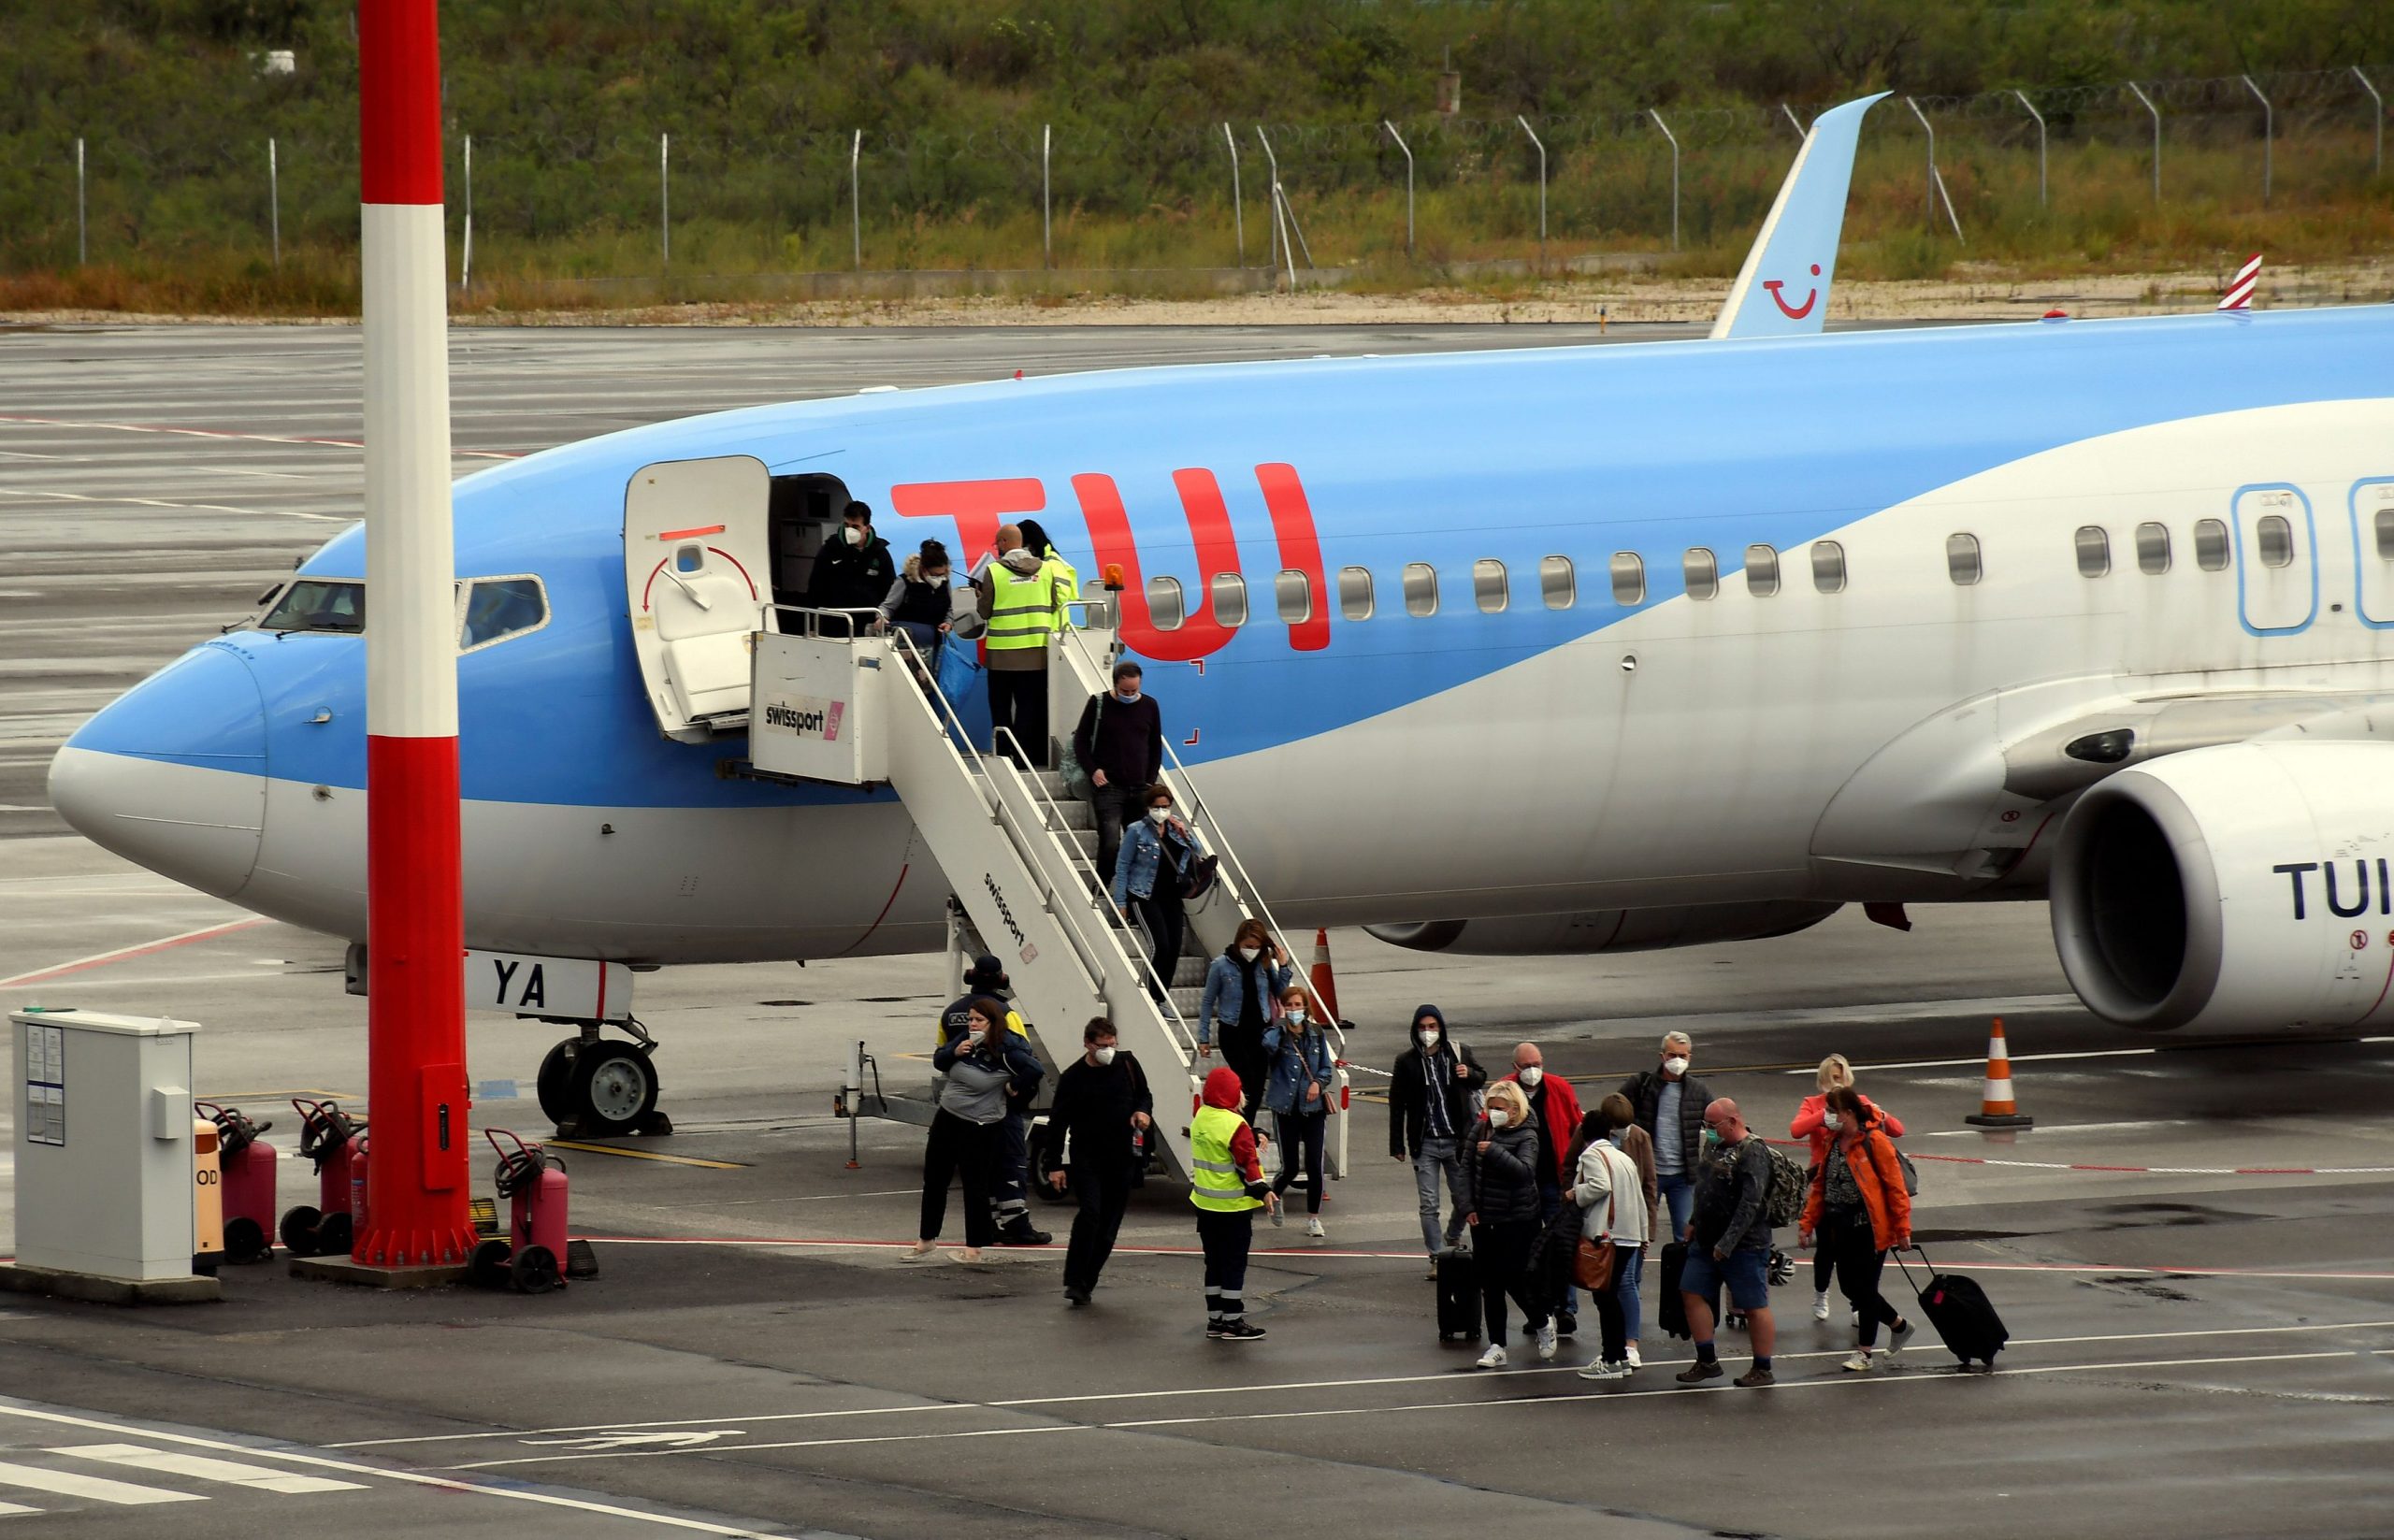 TUI: Over 50 flights a week to Greece – Which destinations are preferred